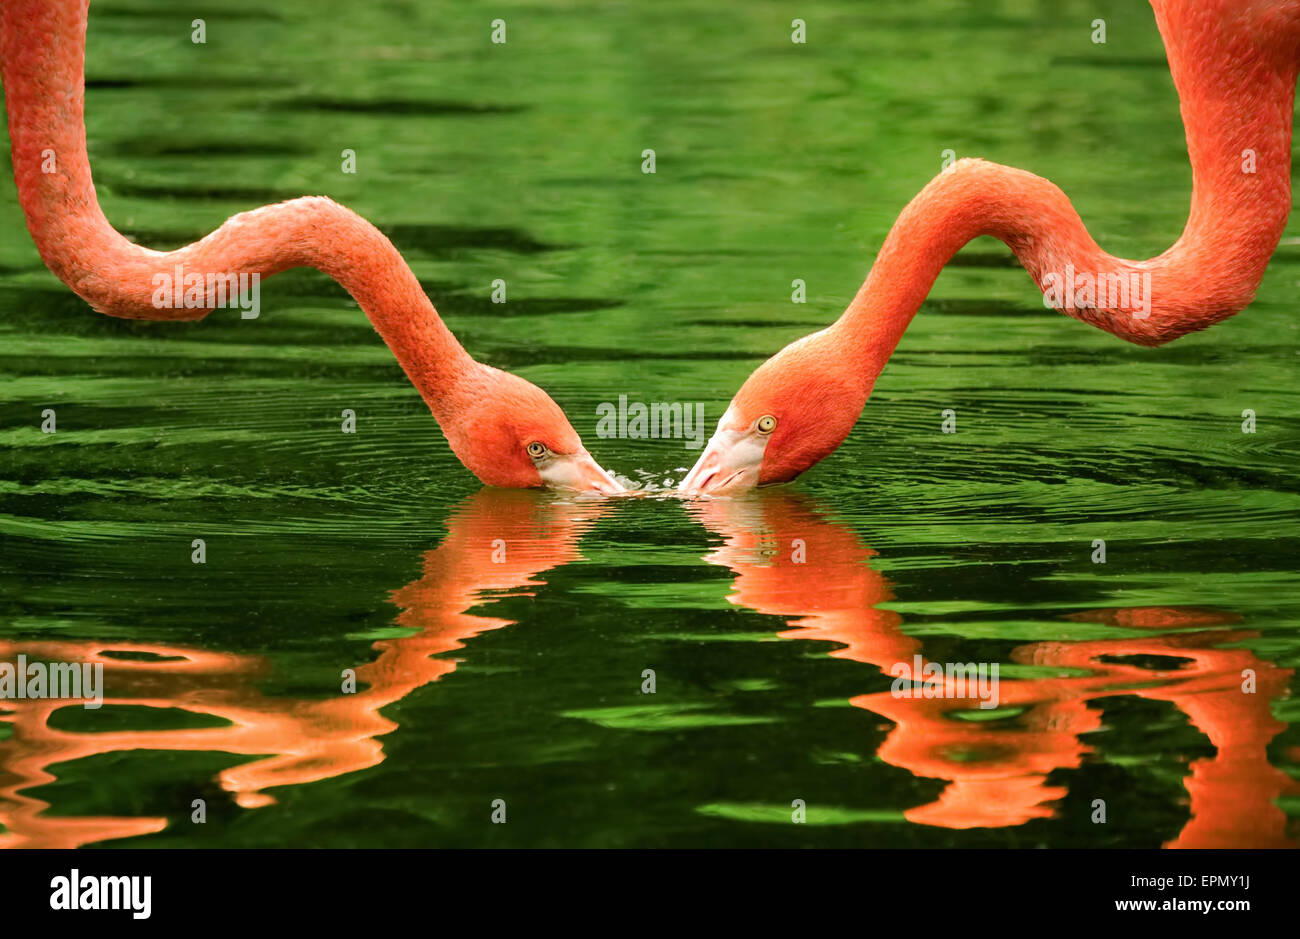 Symmetrical image of 2 flamingos with their necks reflected on the water Stock Photo